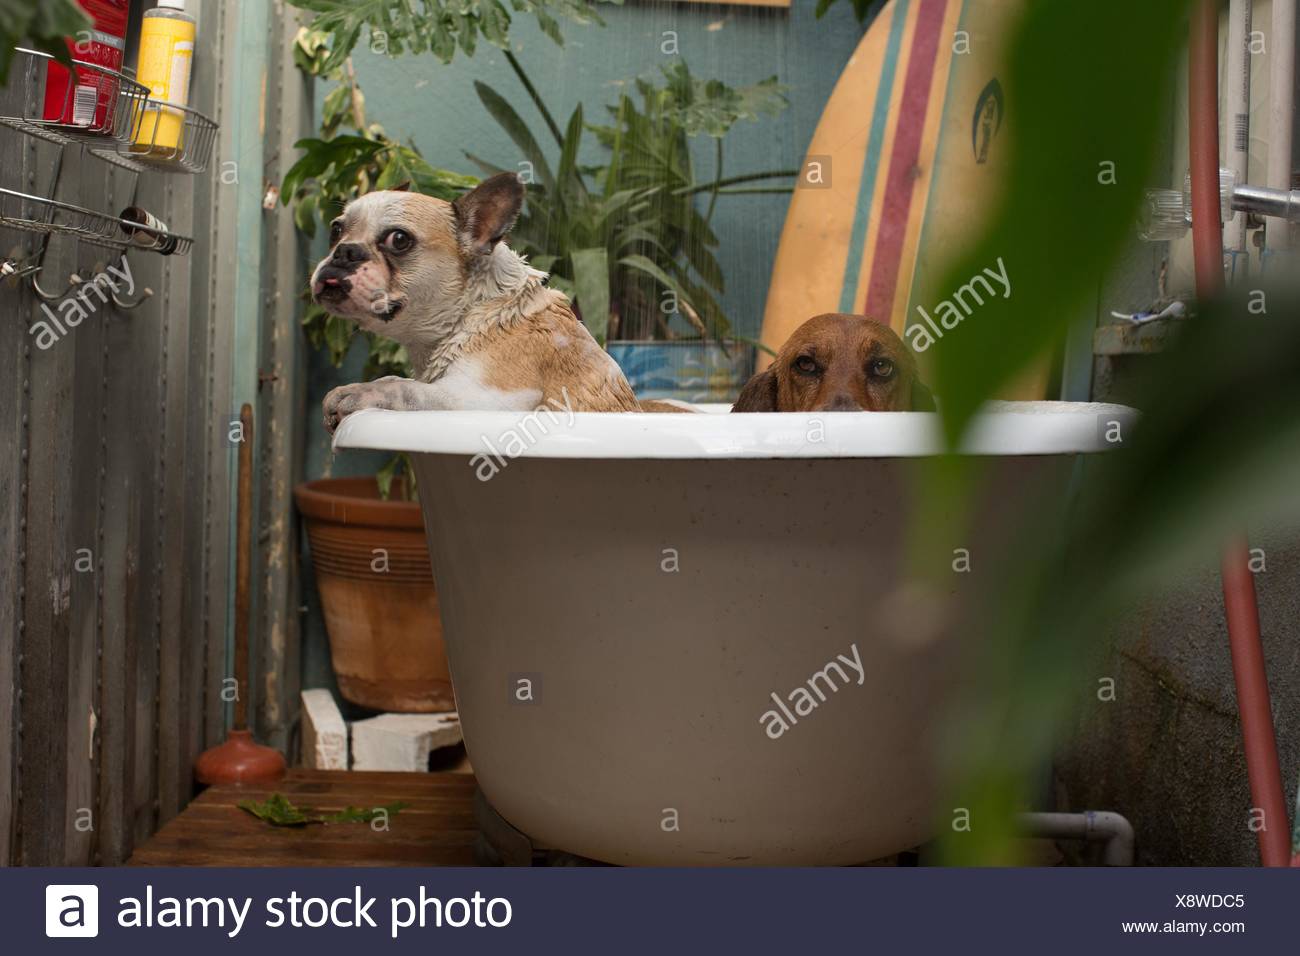 Basset Hound And Wet French Bulldog In Bathtub Looking At Camera